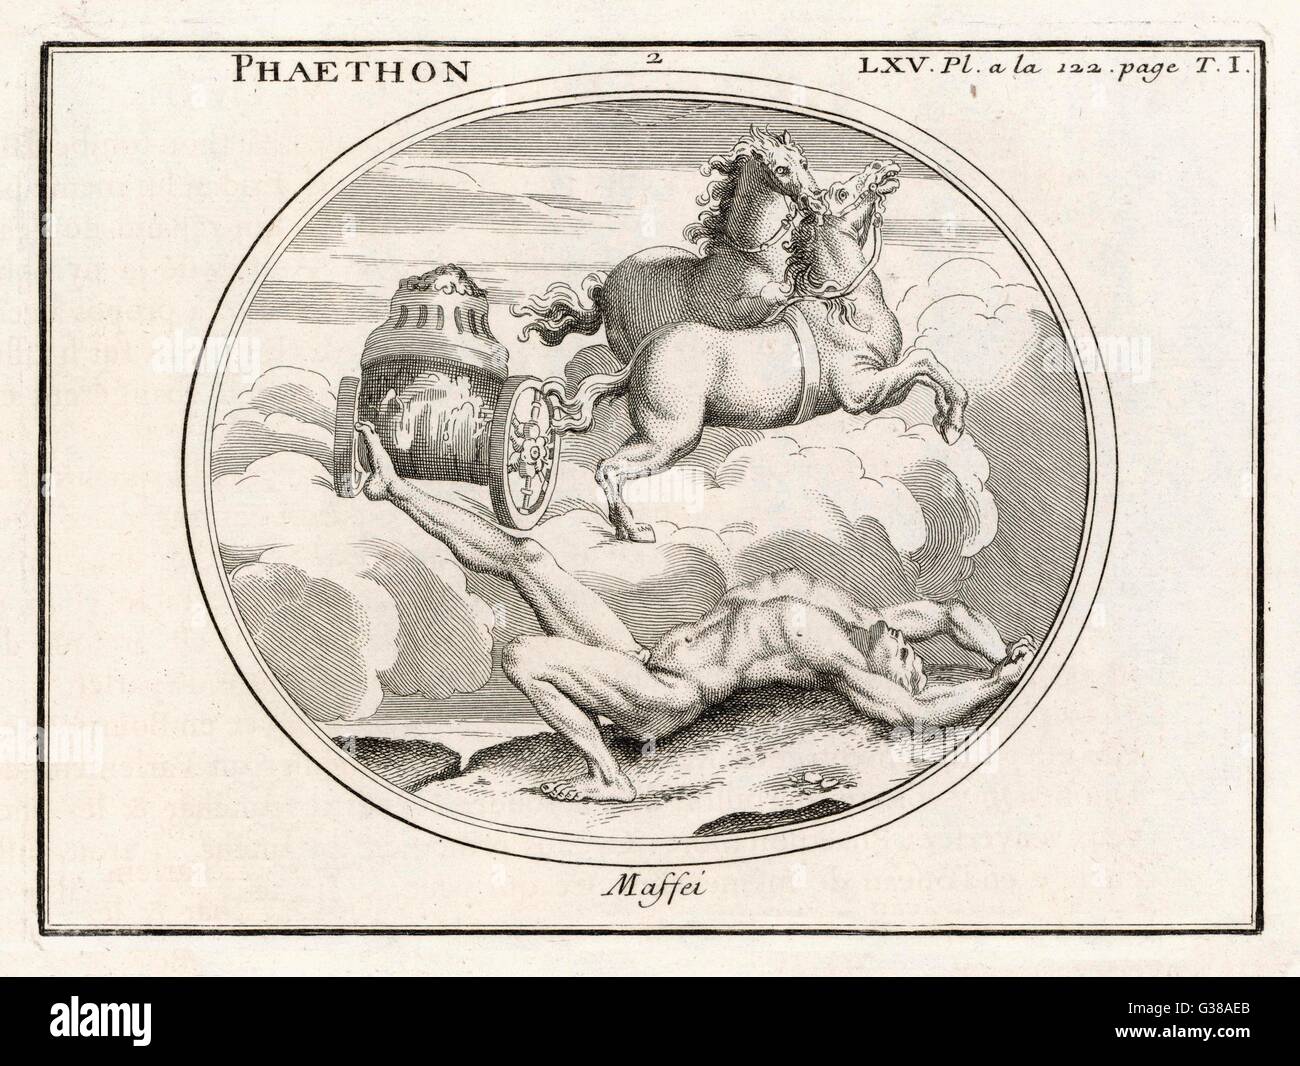 Phaethon (or Phaeton), son of  sun-god Helios, drives his  father's chariot but can't  control the horses, causing  widespread havoc till Zeus  kills him with a thunderbolt Stock Photo